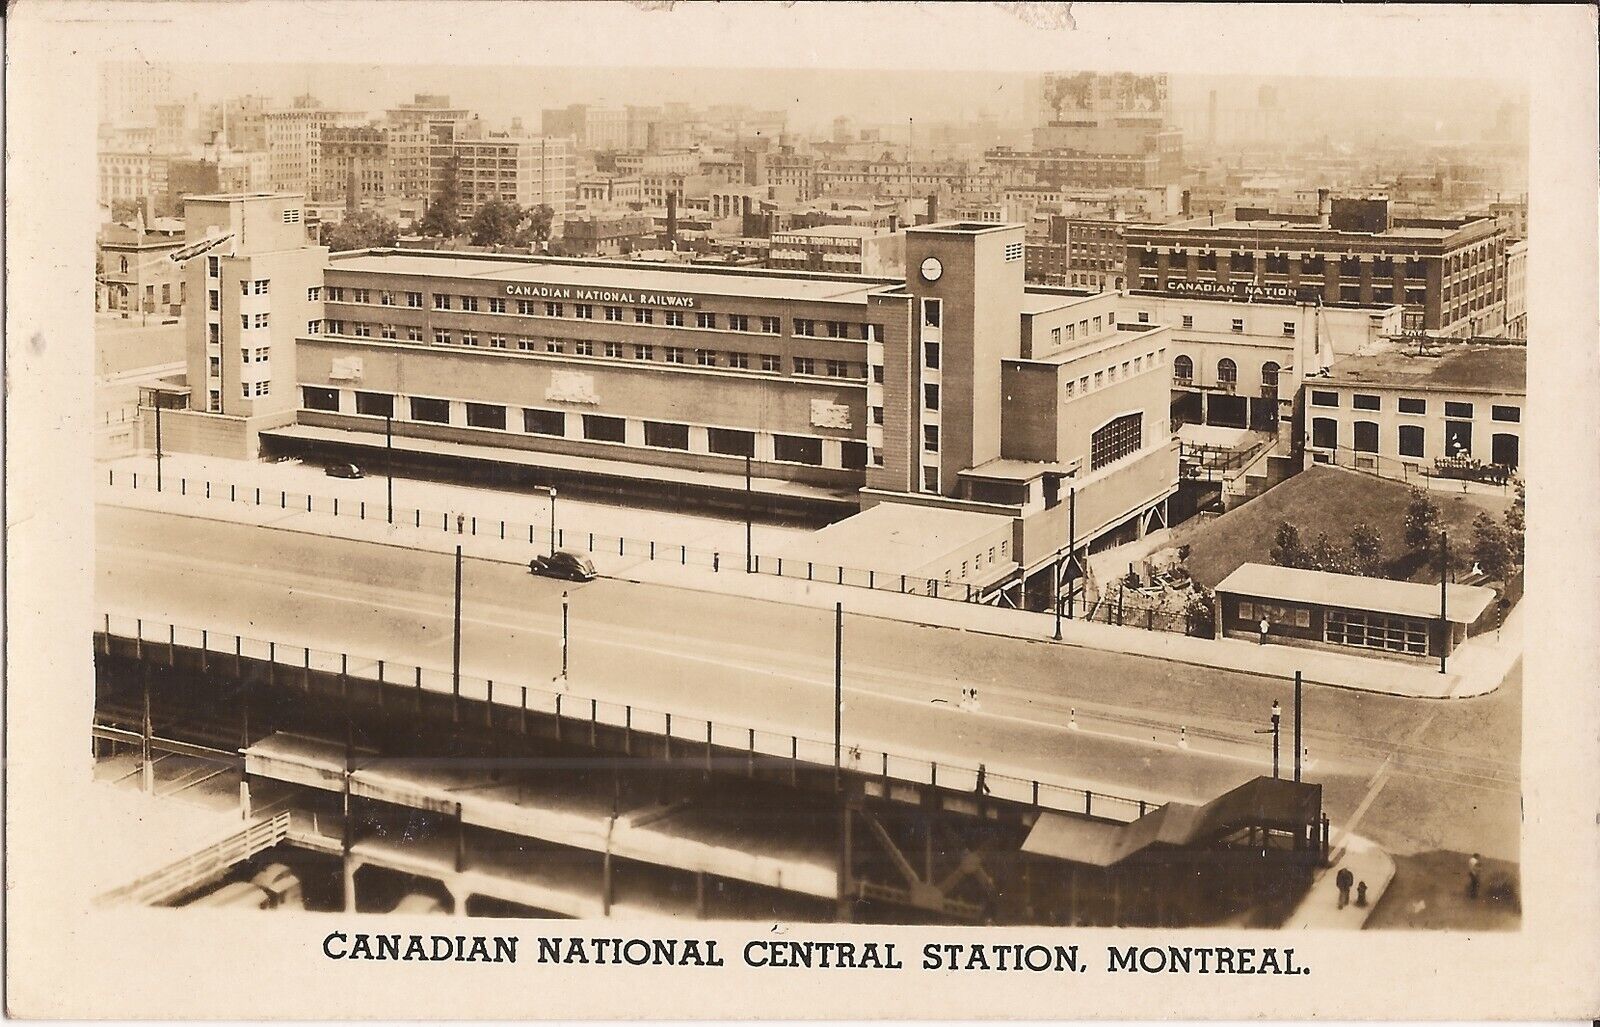 Montreal, CANADA - Canadian National Central Station - REAL PHOTO - 1943